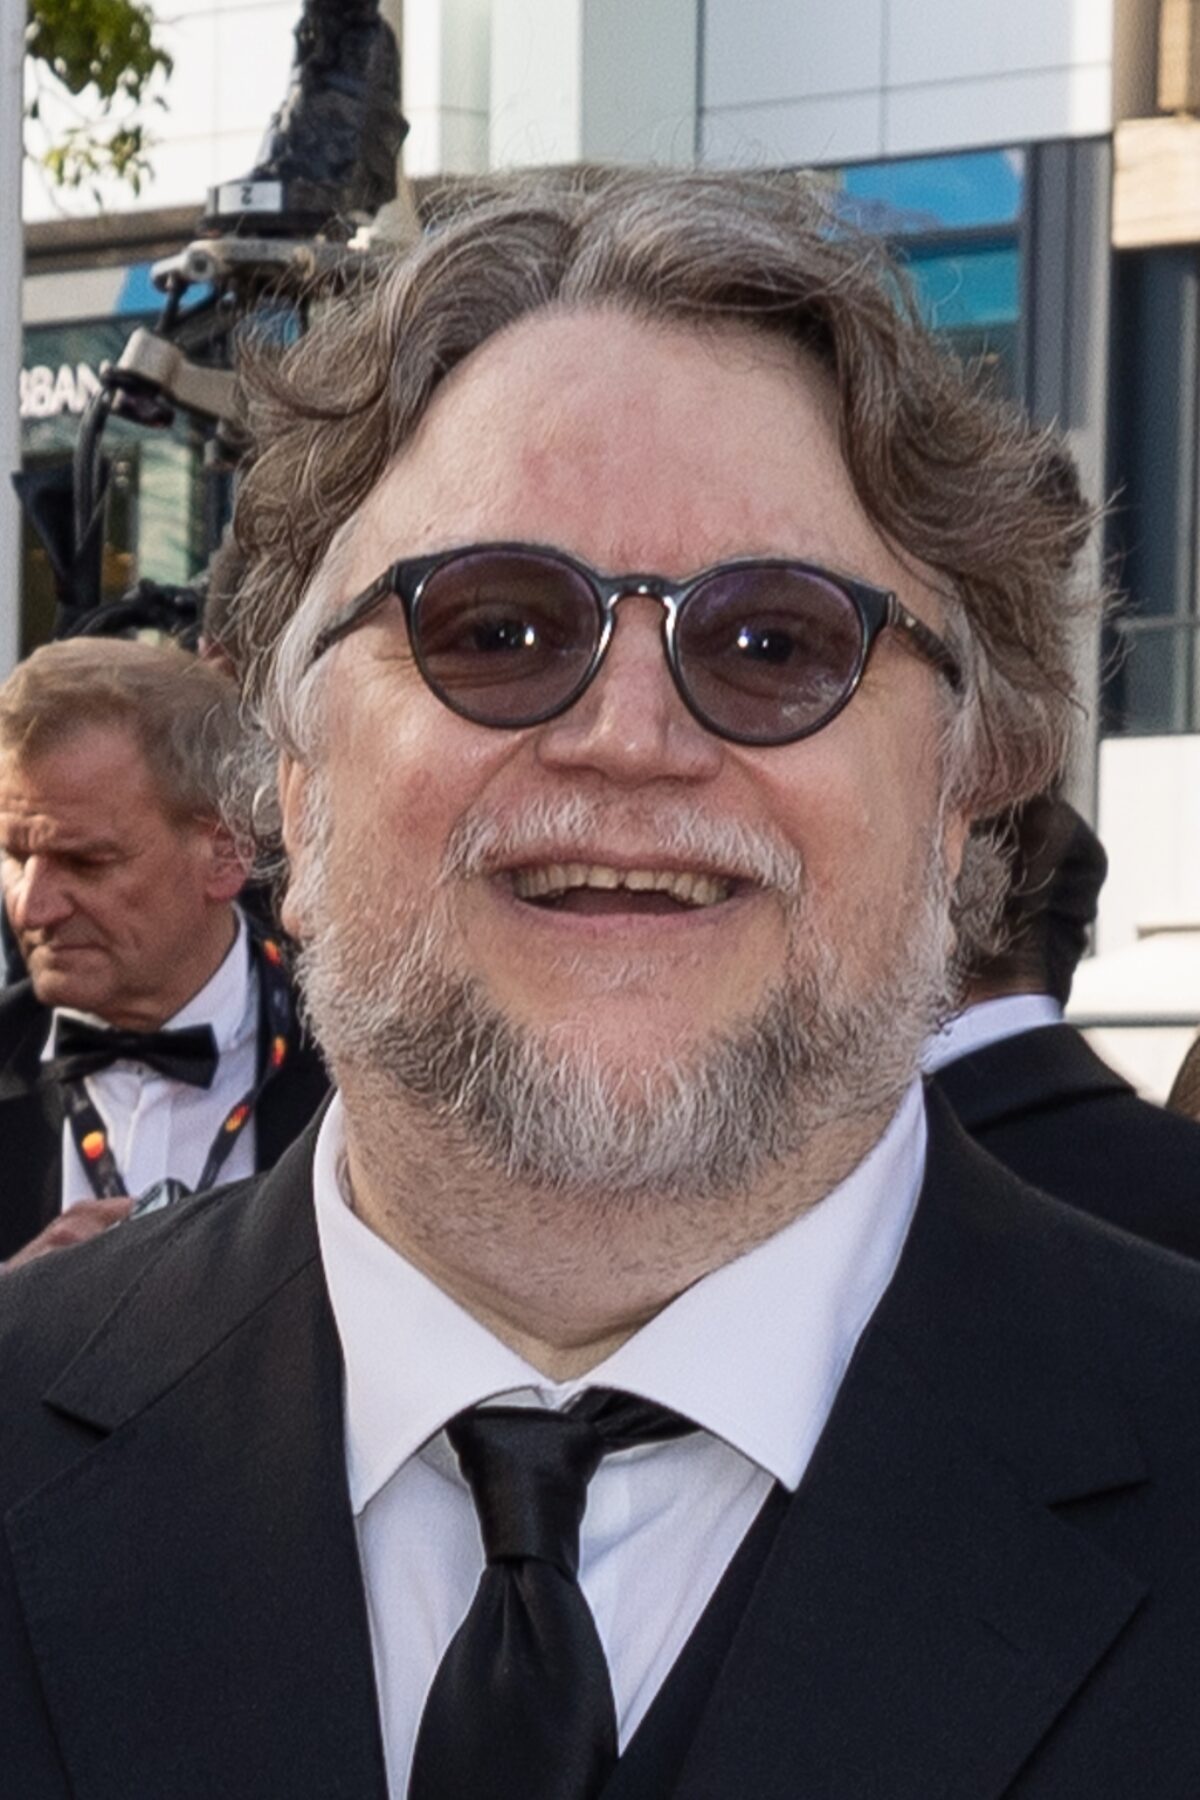 CANNES, FRANCE - MAY 24: Guillermo del Toro attends the 75th Anniversary celebration screening of 